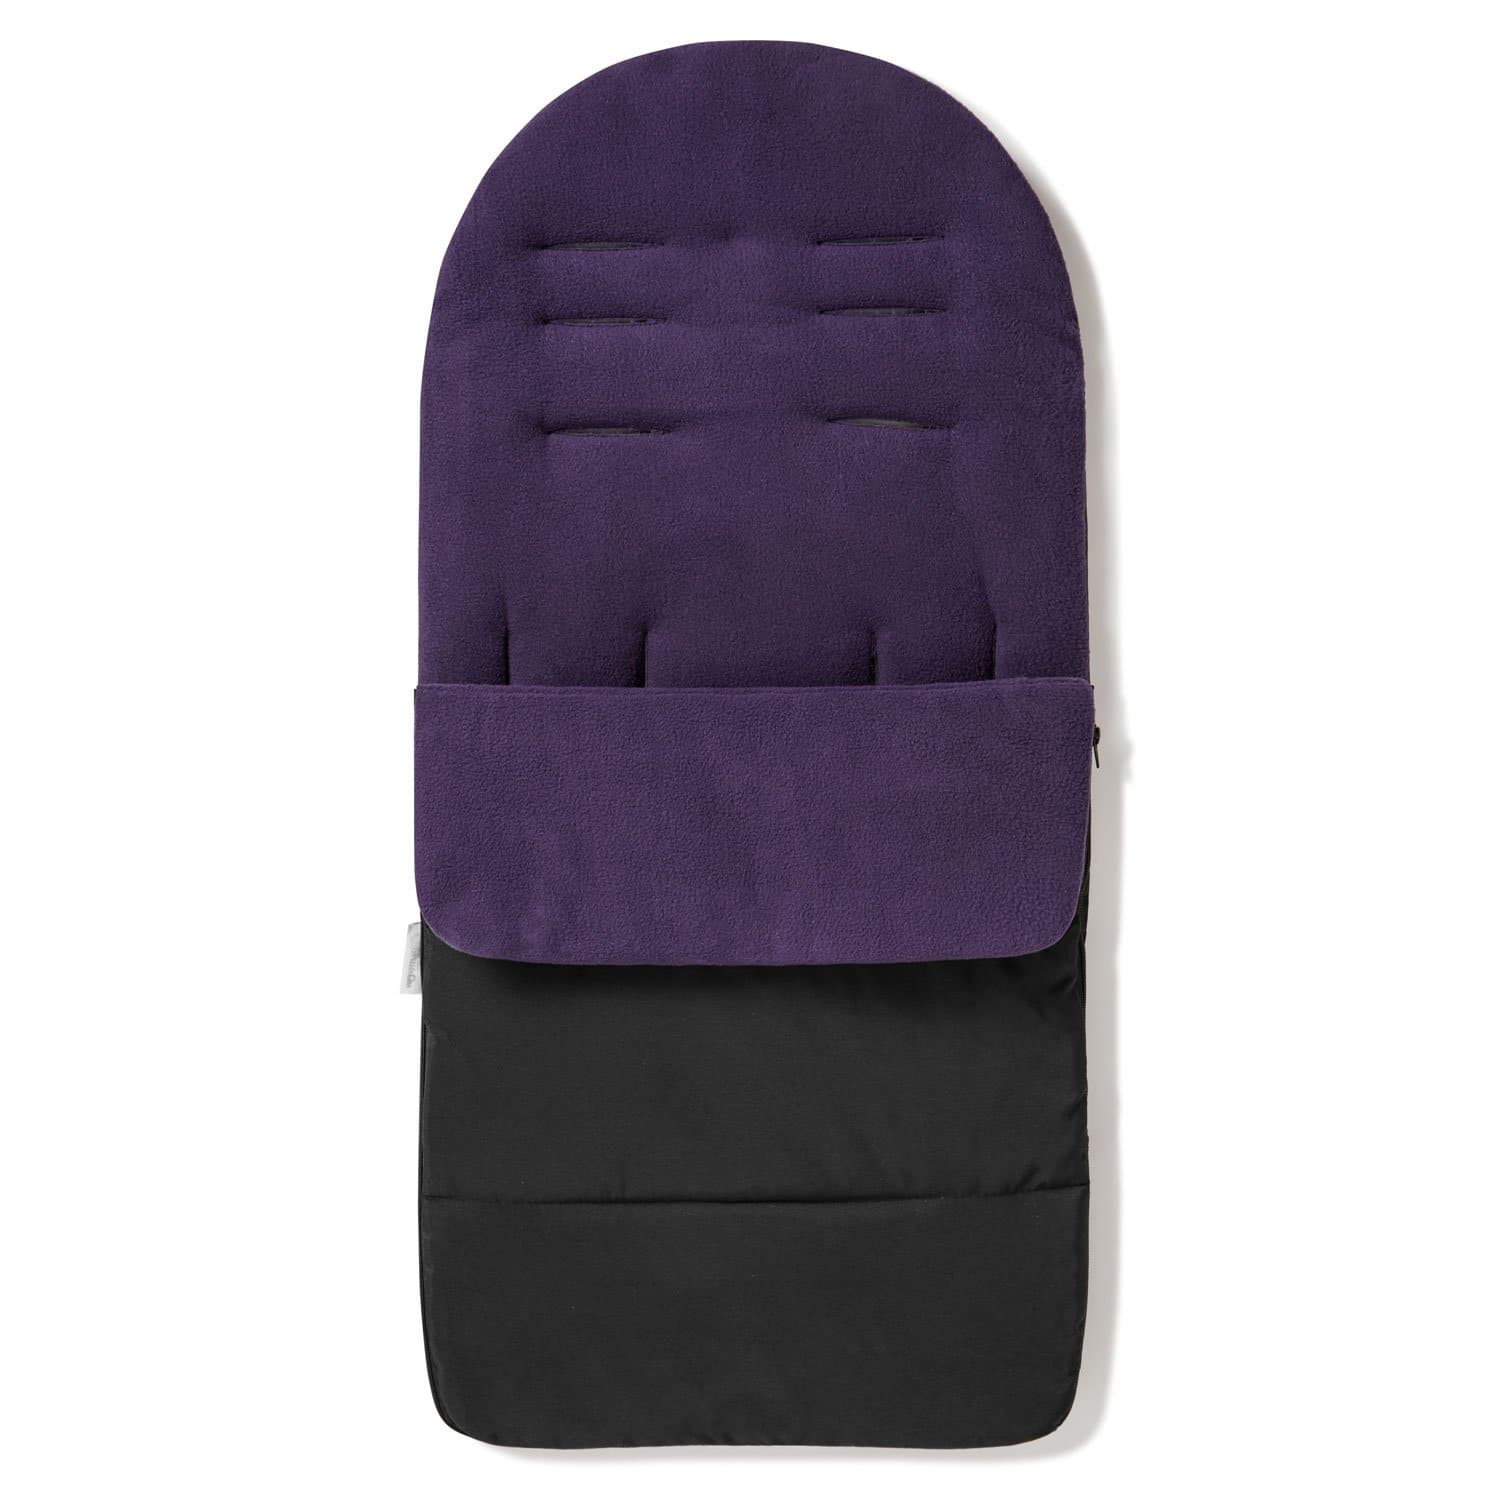 Premium Footmuff / Cosy Toes Compatible with Ickle Bubba - Plum Purple / Fits All Models | For Your Little One